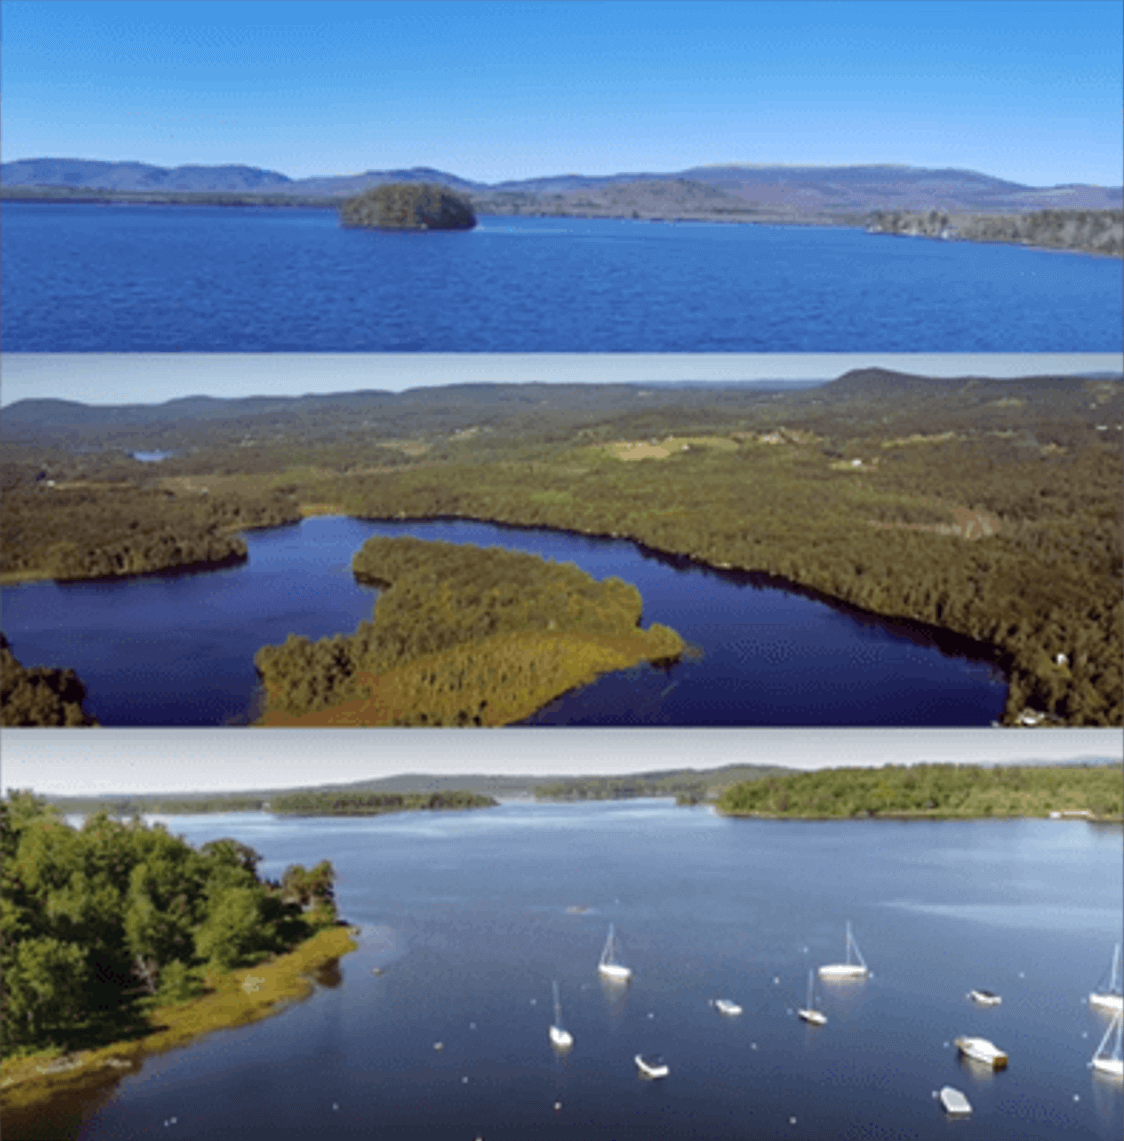 Stocking Maine's Lakes and Ponds by Air